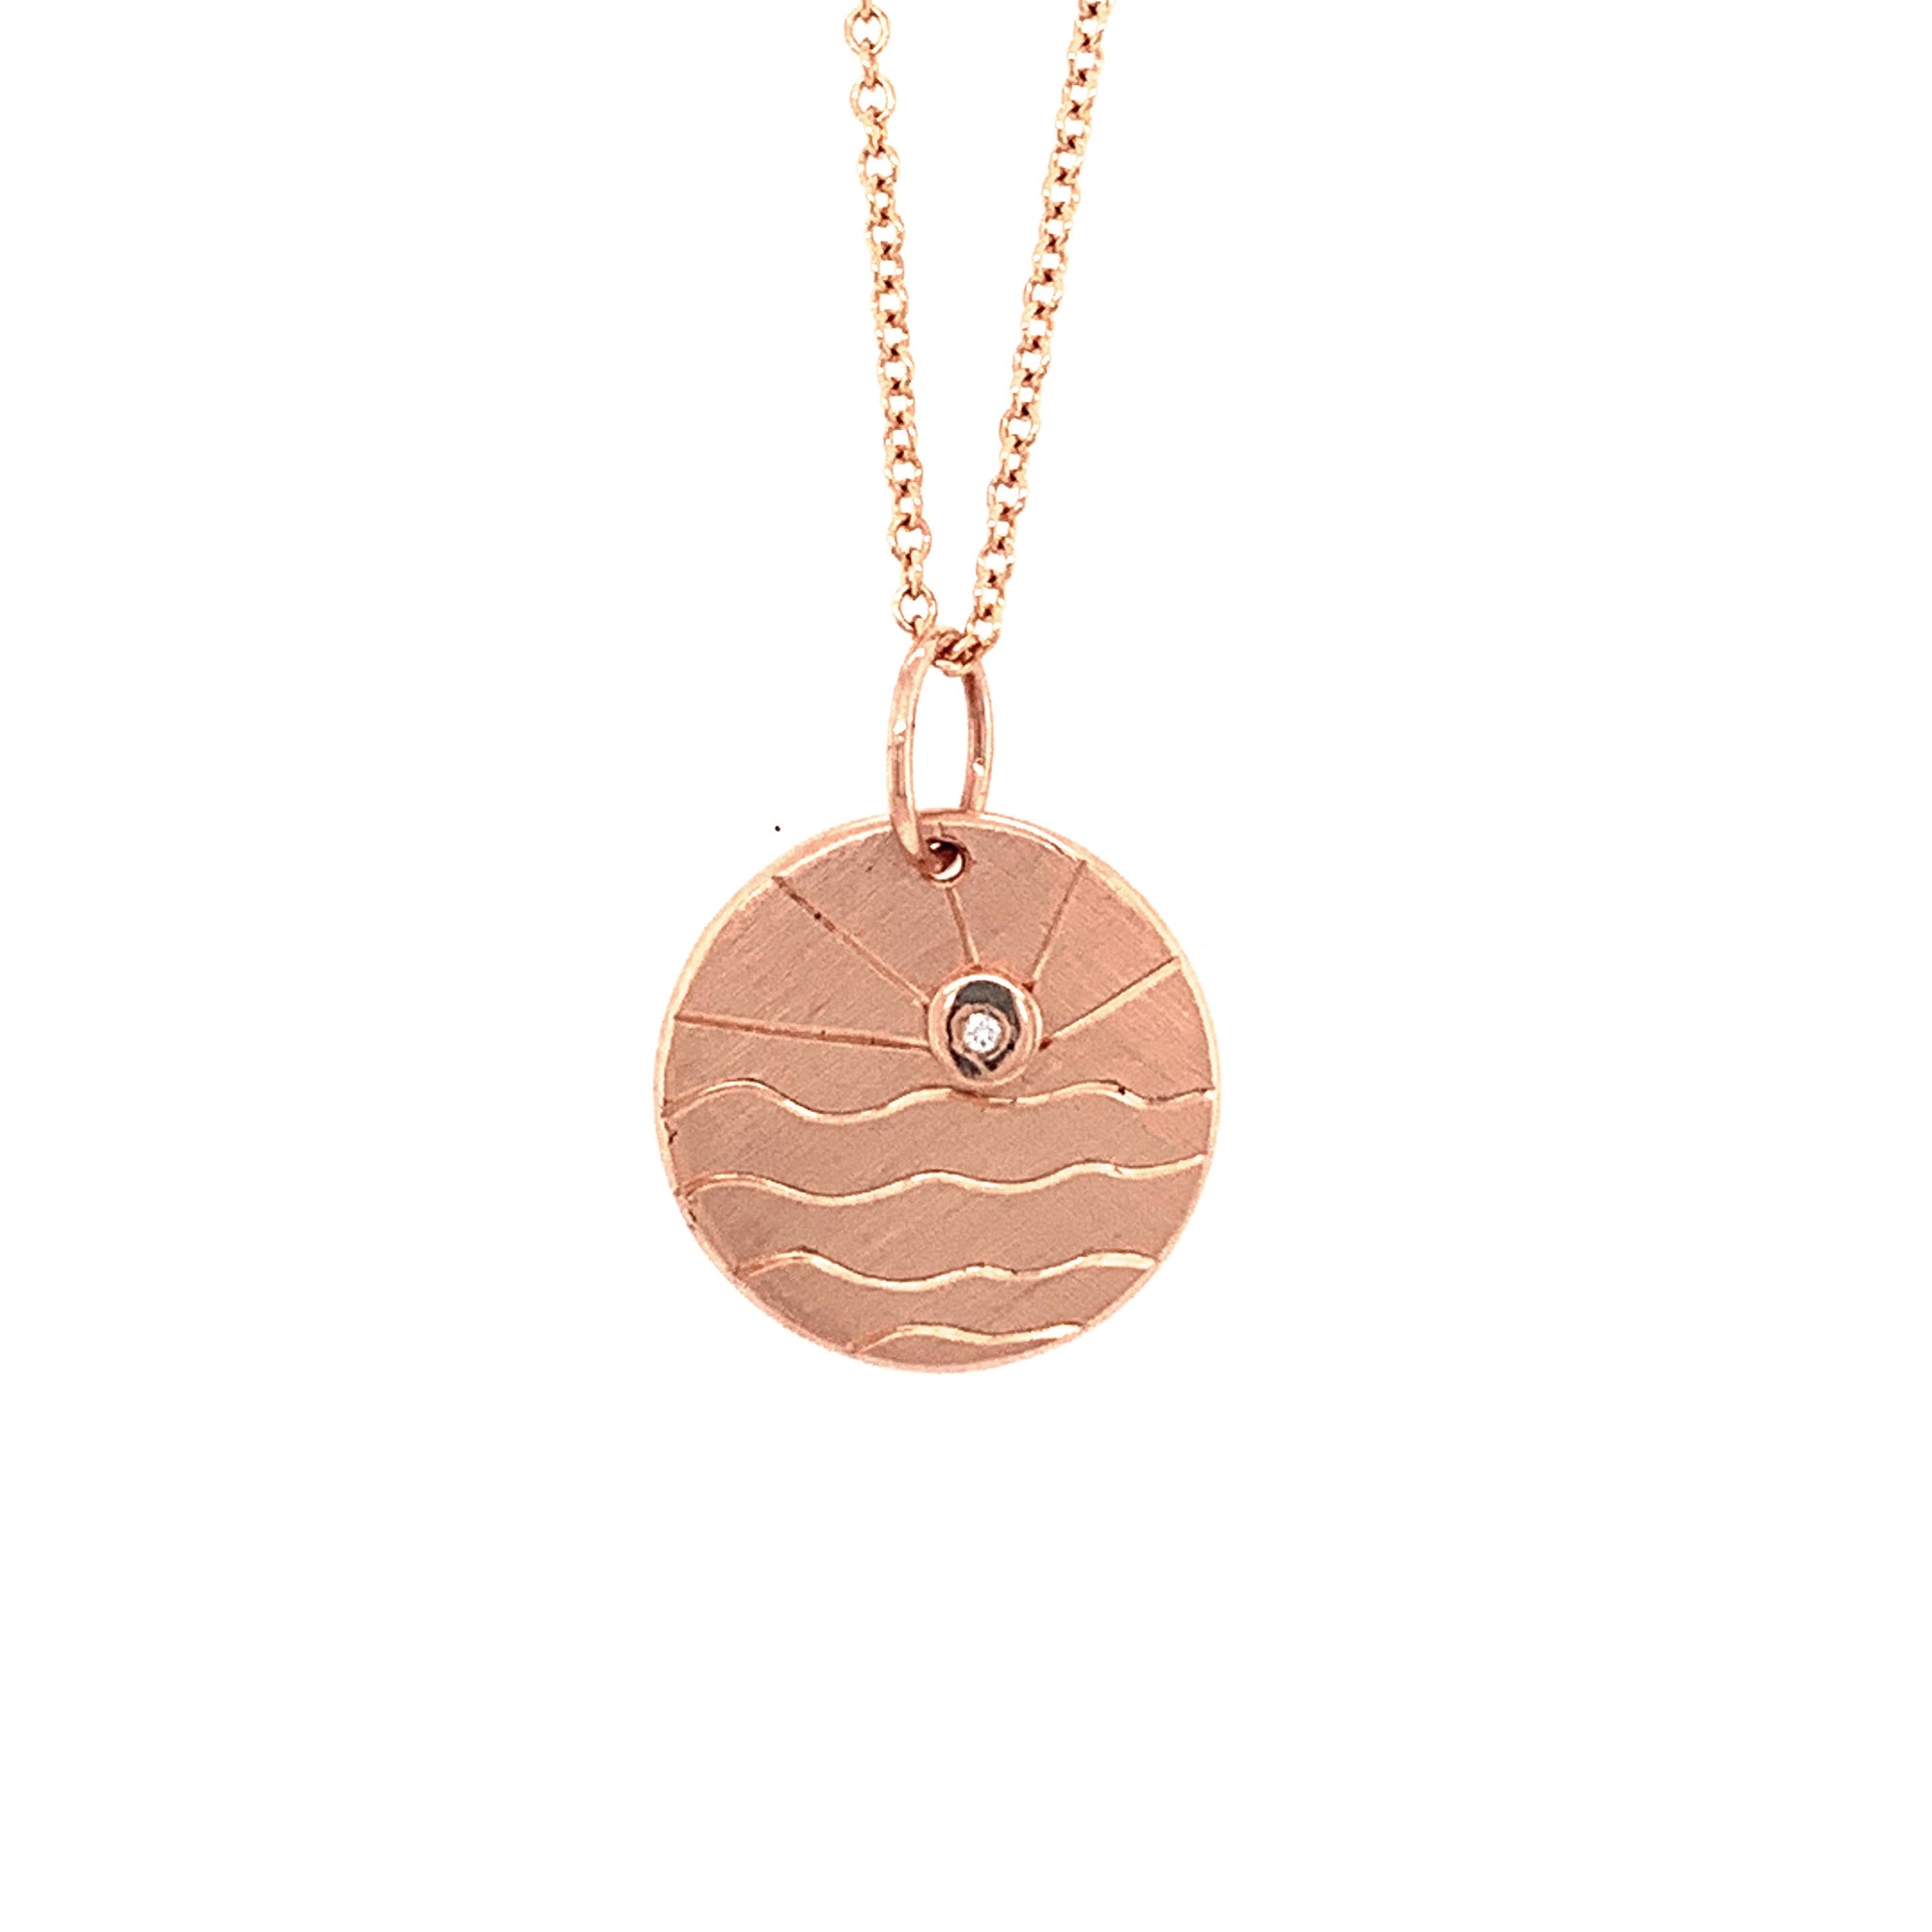 14k rose gold GOOS charm with hand etching